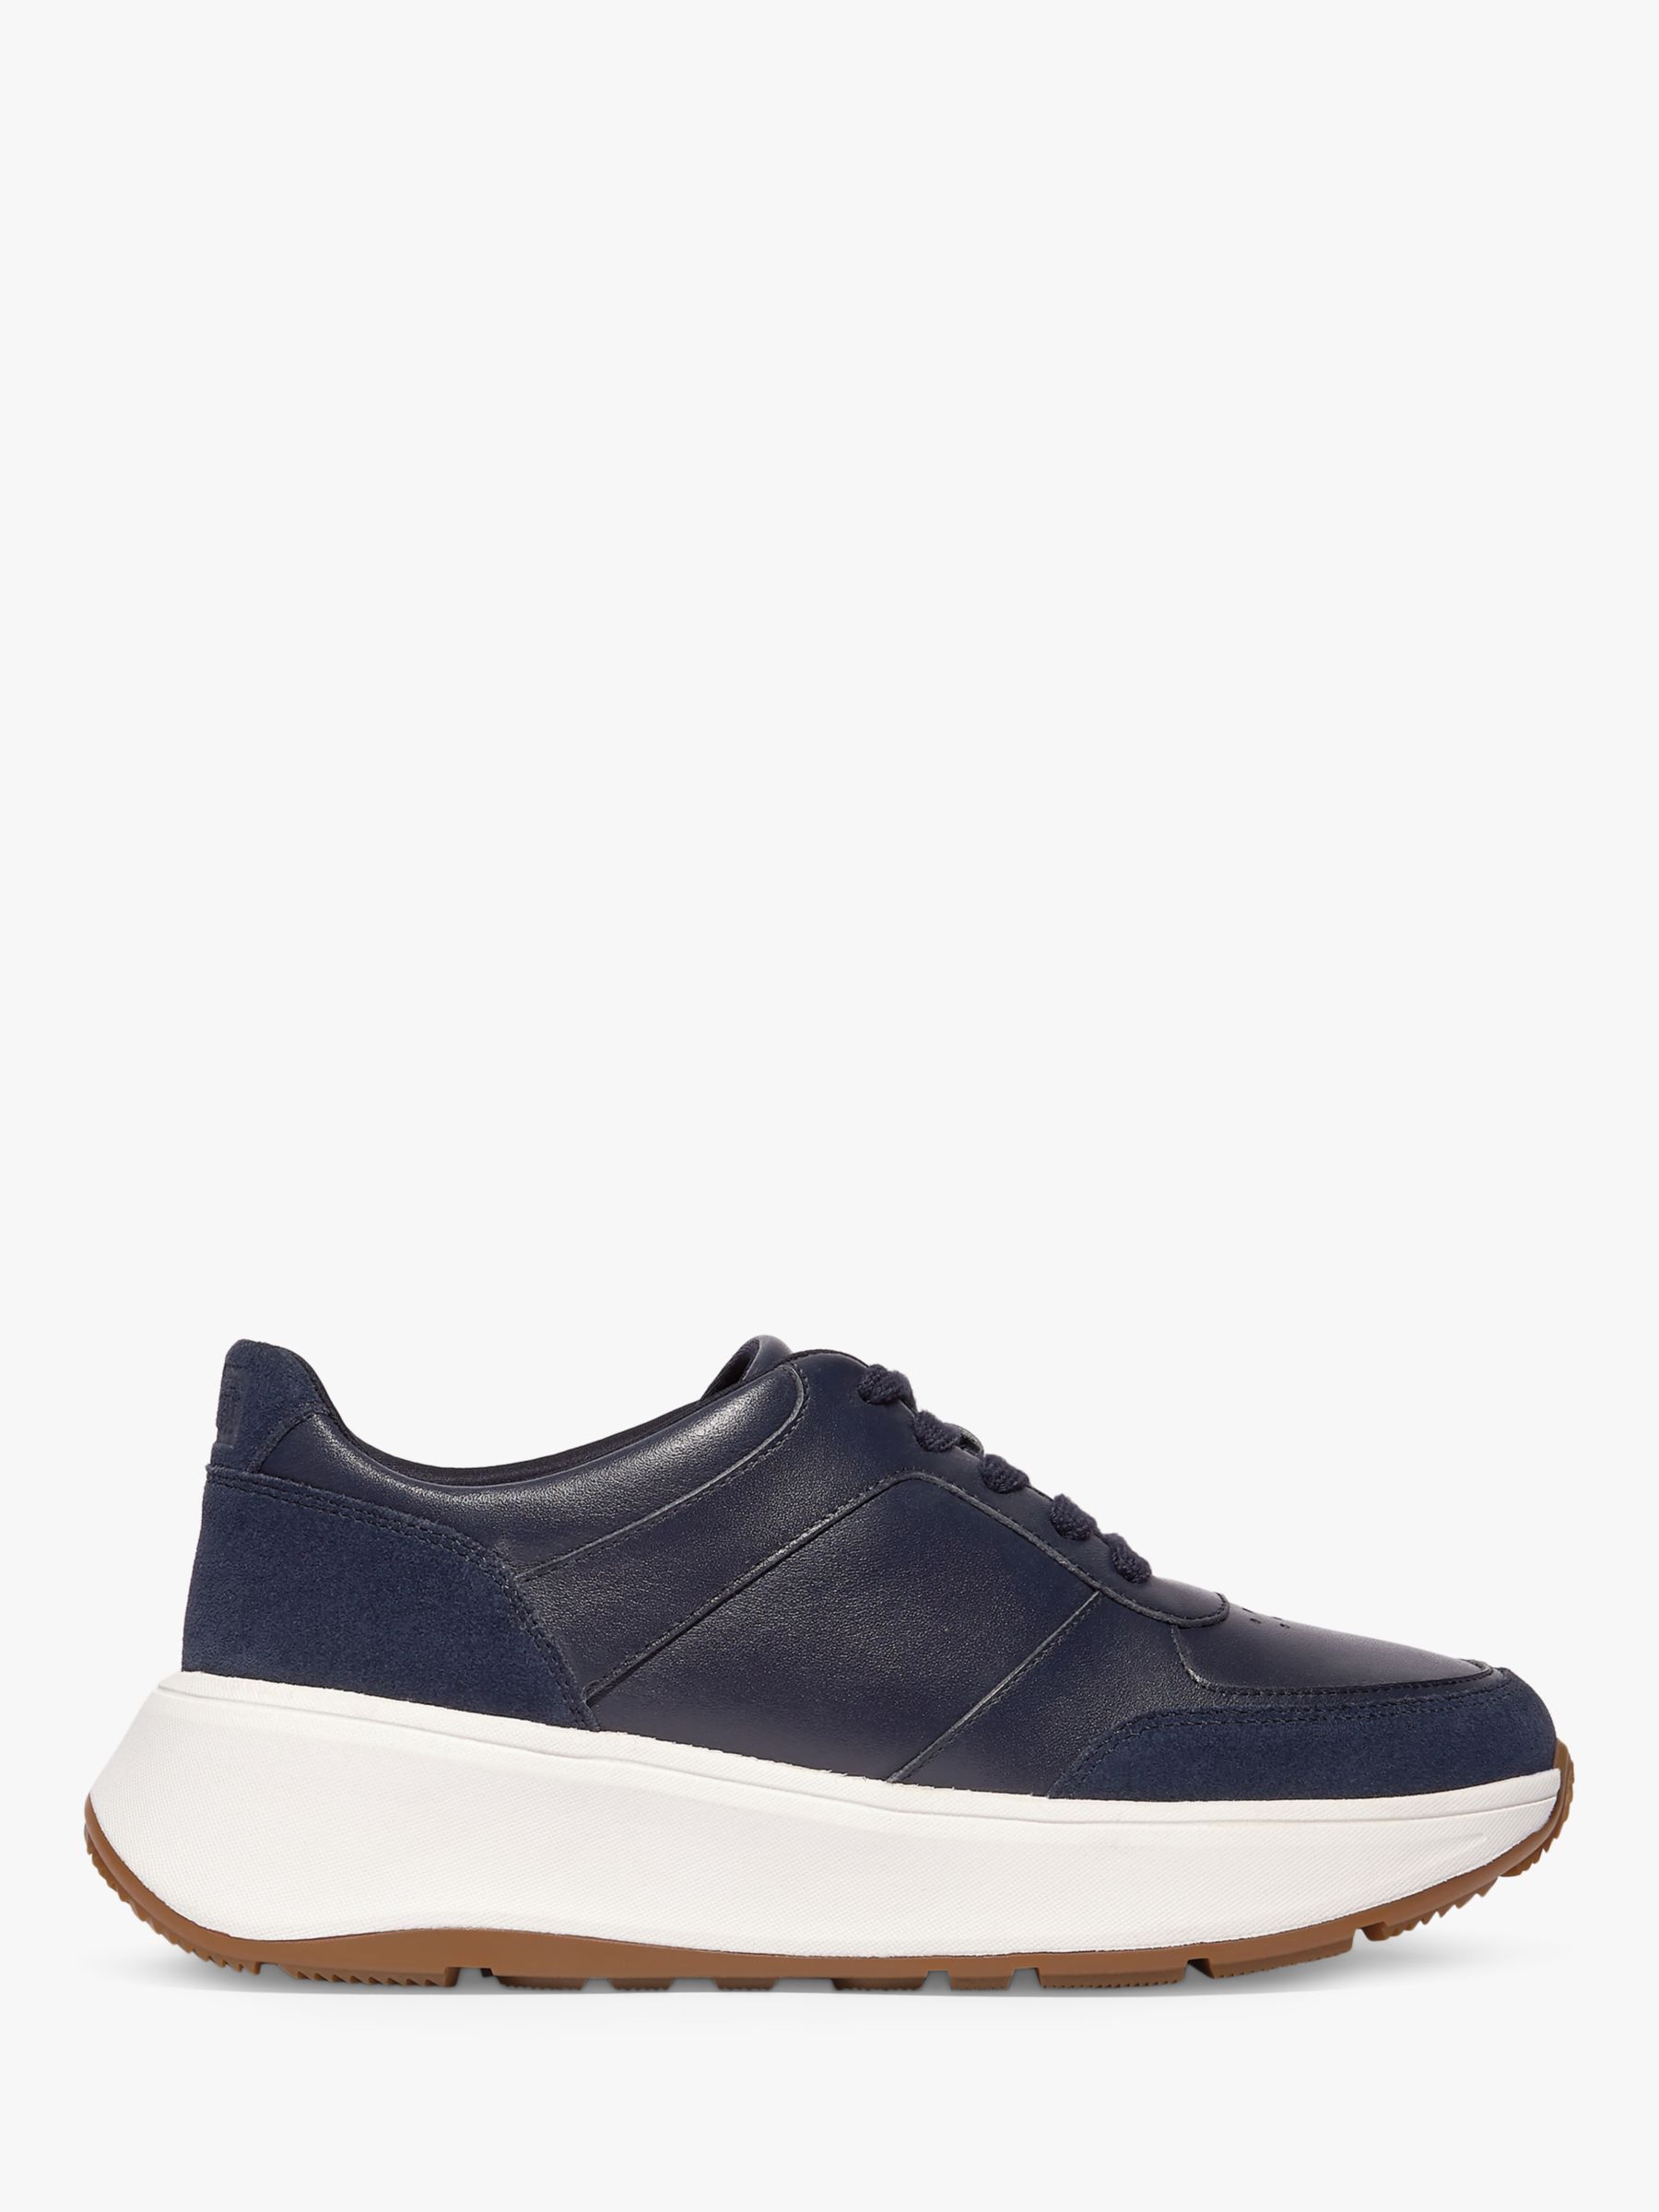 FitFlop F-Mode Leather Trainers, Midnight Navy at John Lewis & Partners